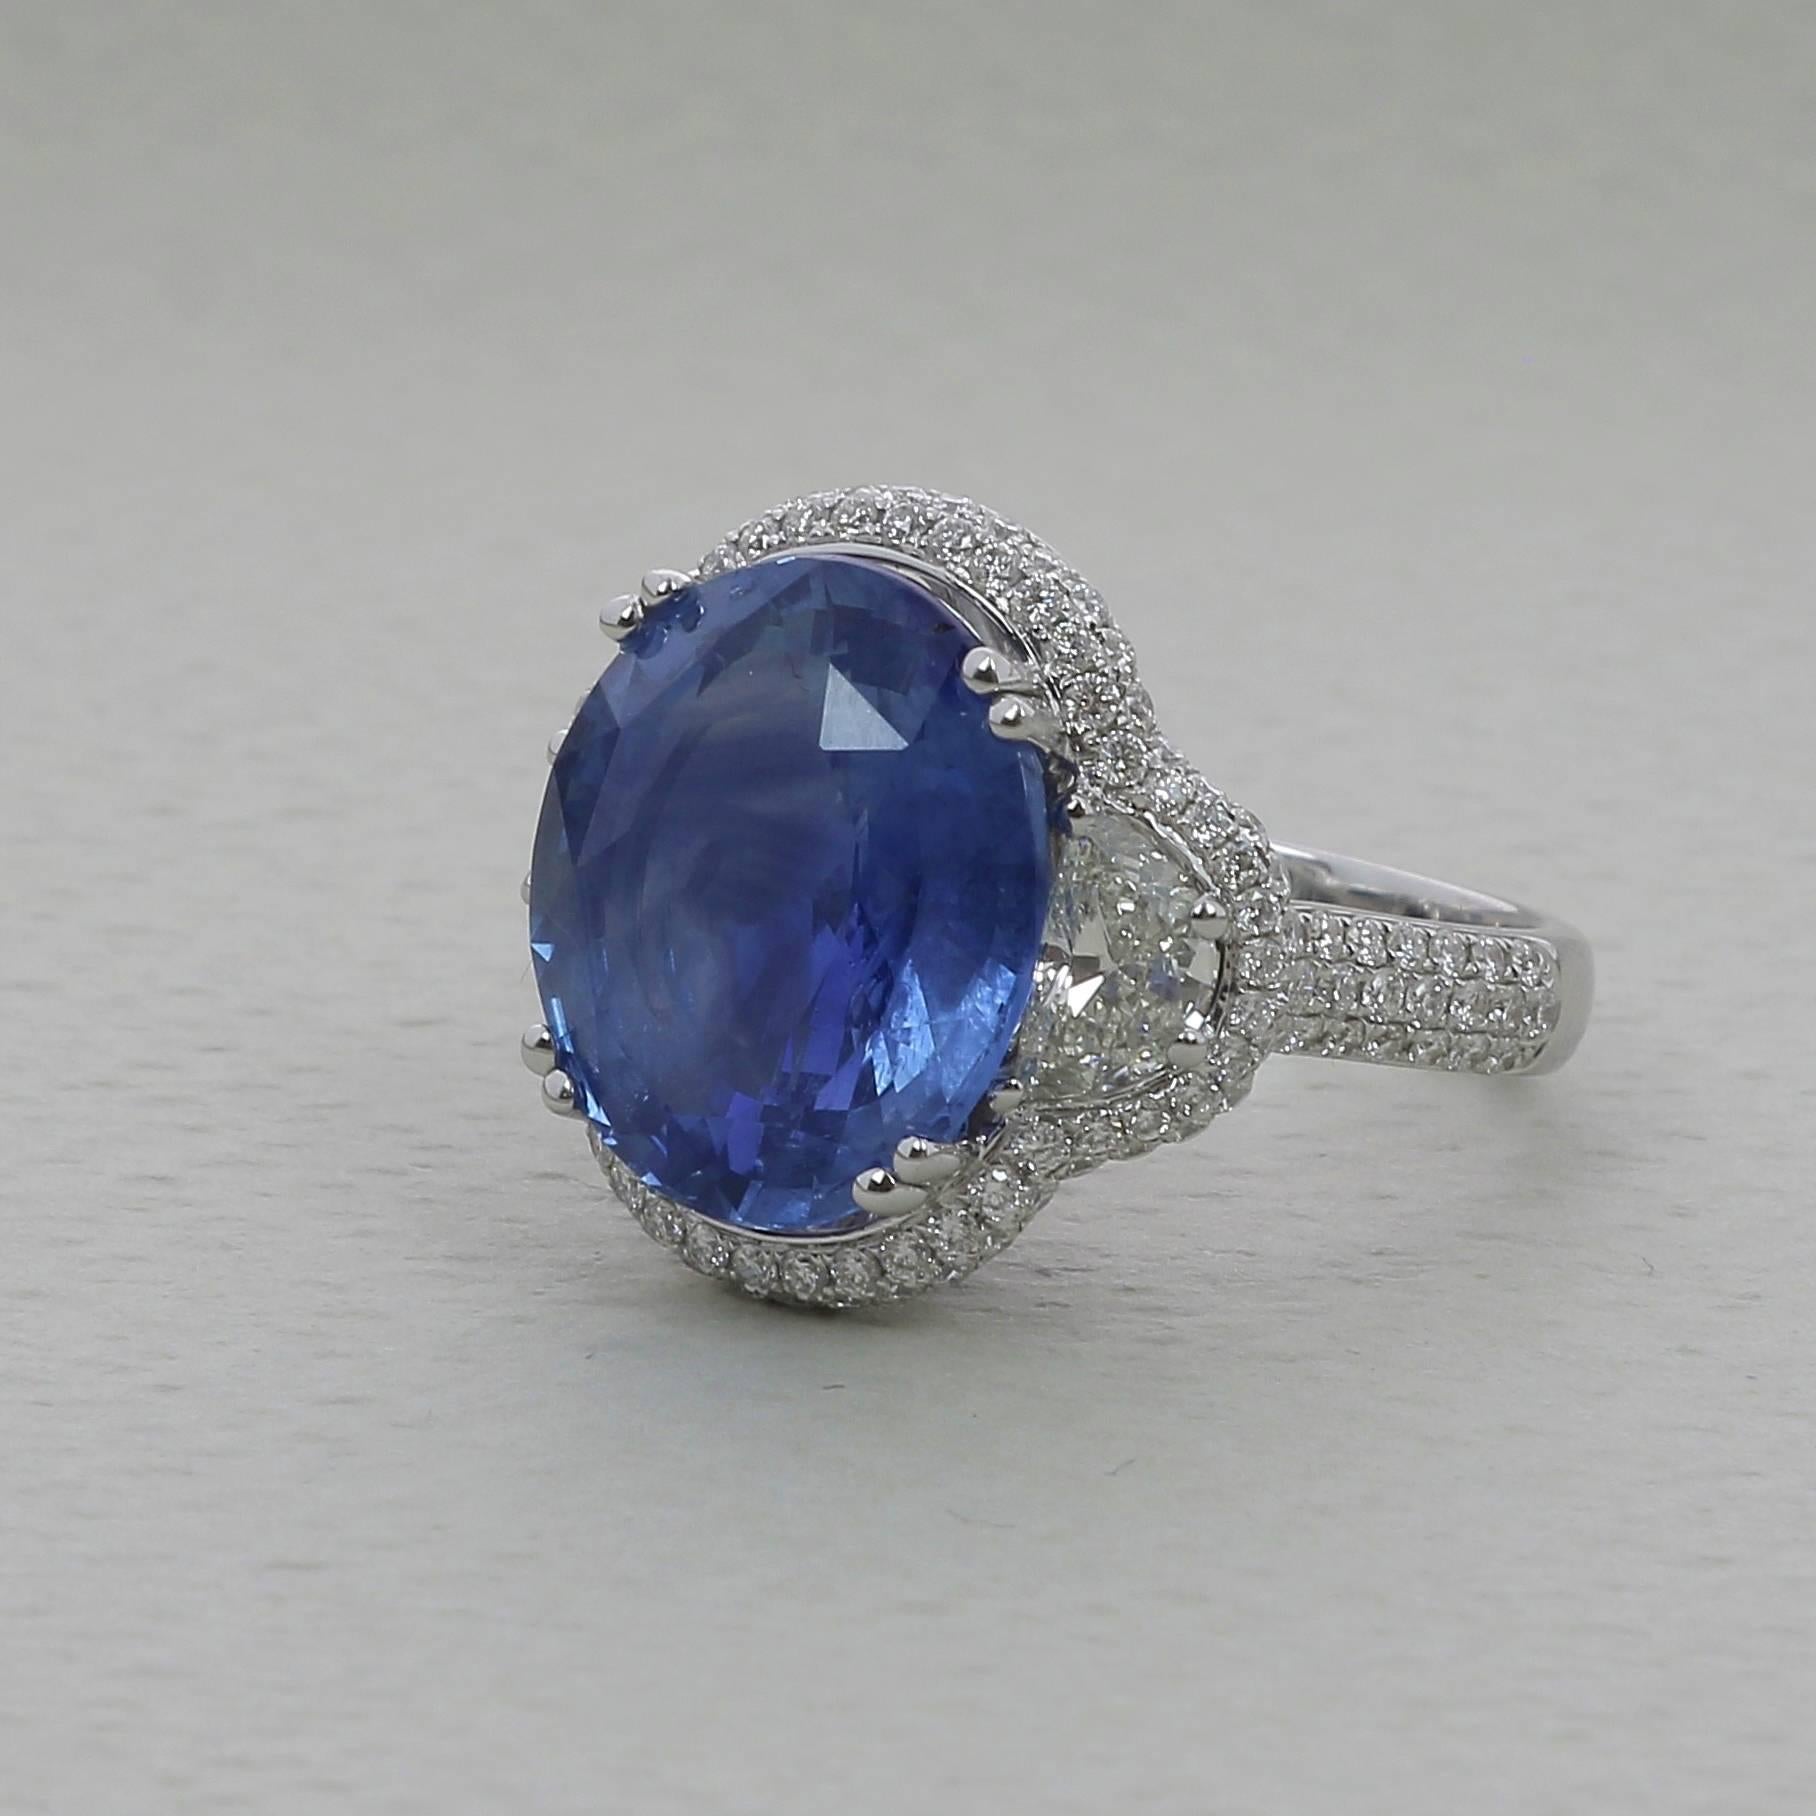 A Blue Sapphire Ring weighing 12.47 carats. The stone’s shape is oval, having for colors a striking Blue. 
The ring is set with two Half Moon Diamond weighing 0.91 Carats and 134 Round Diamonds weighing 0.89 Carats . 
The Diamond are GVS